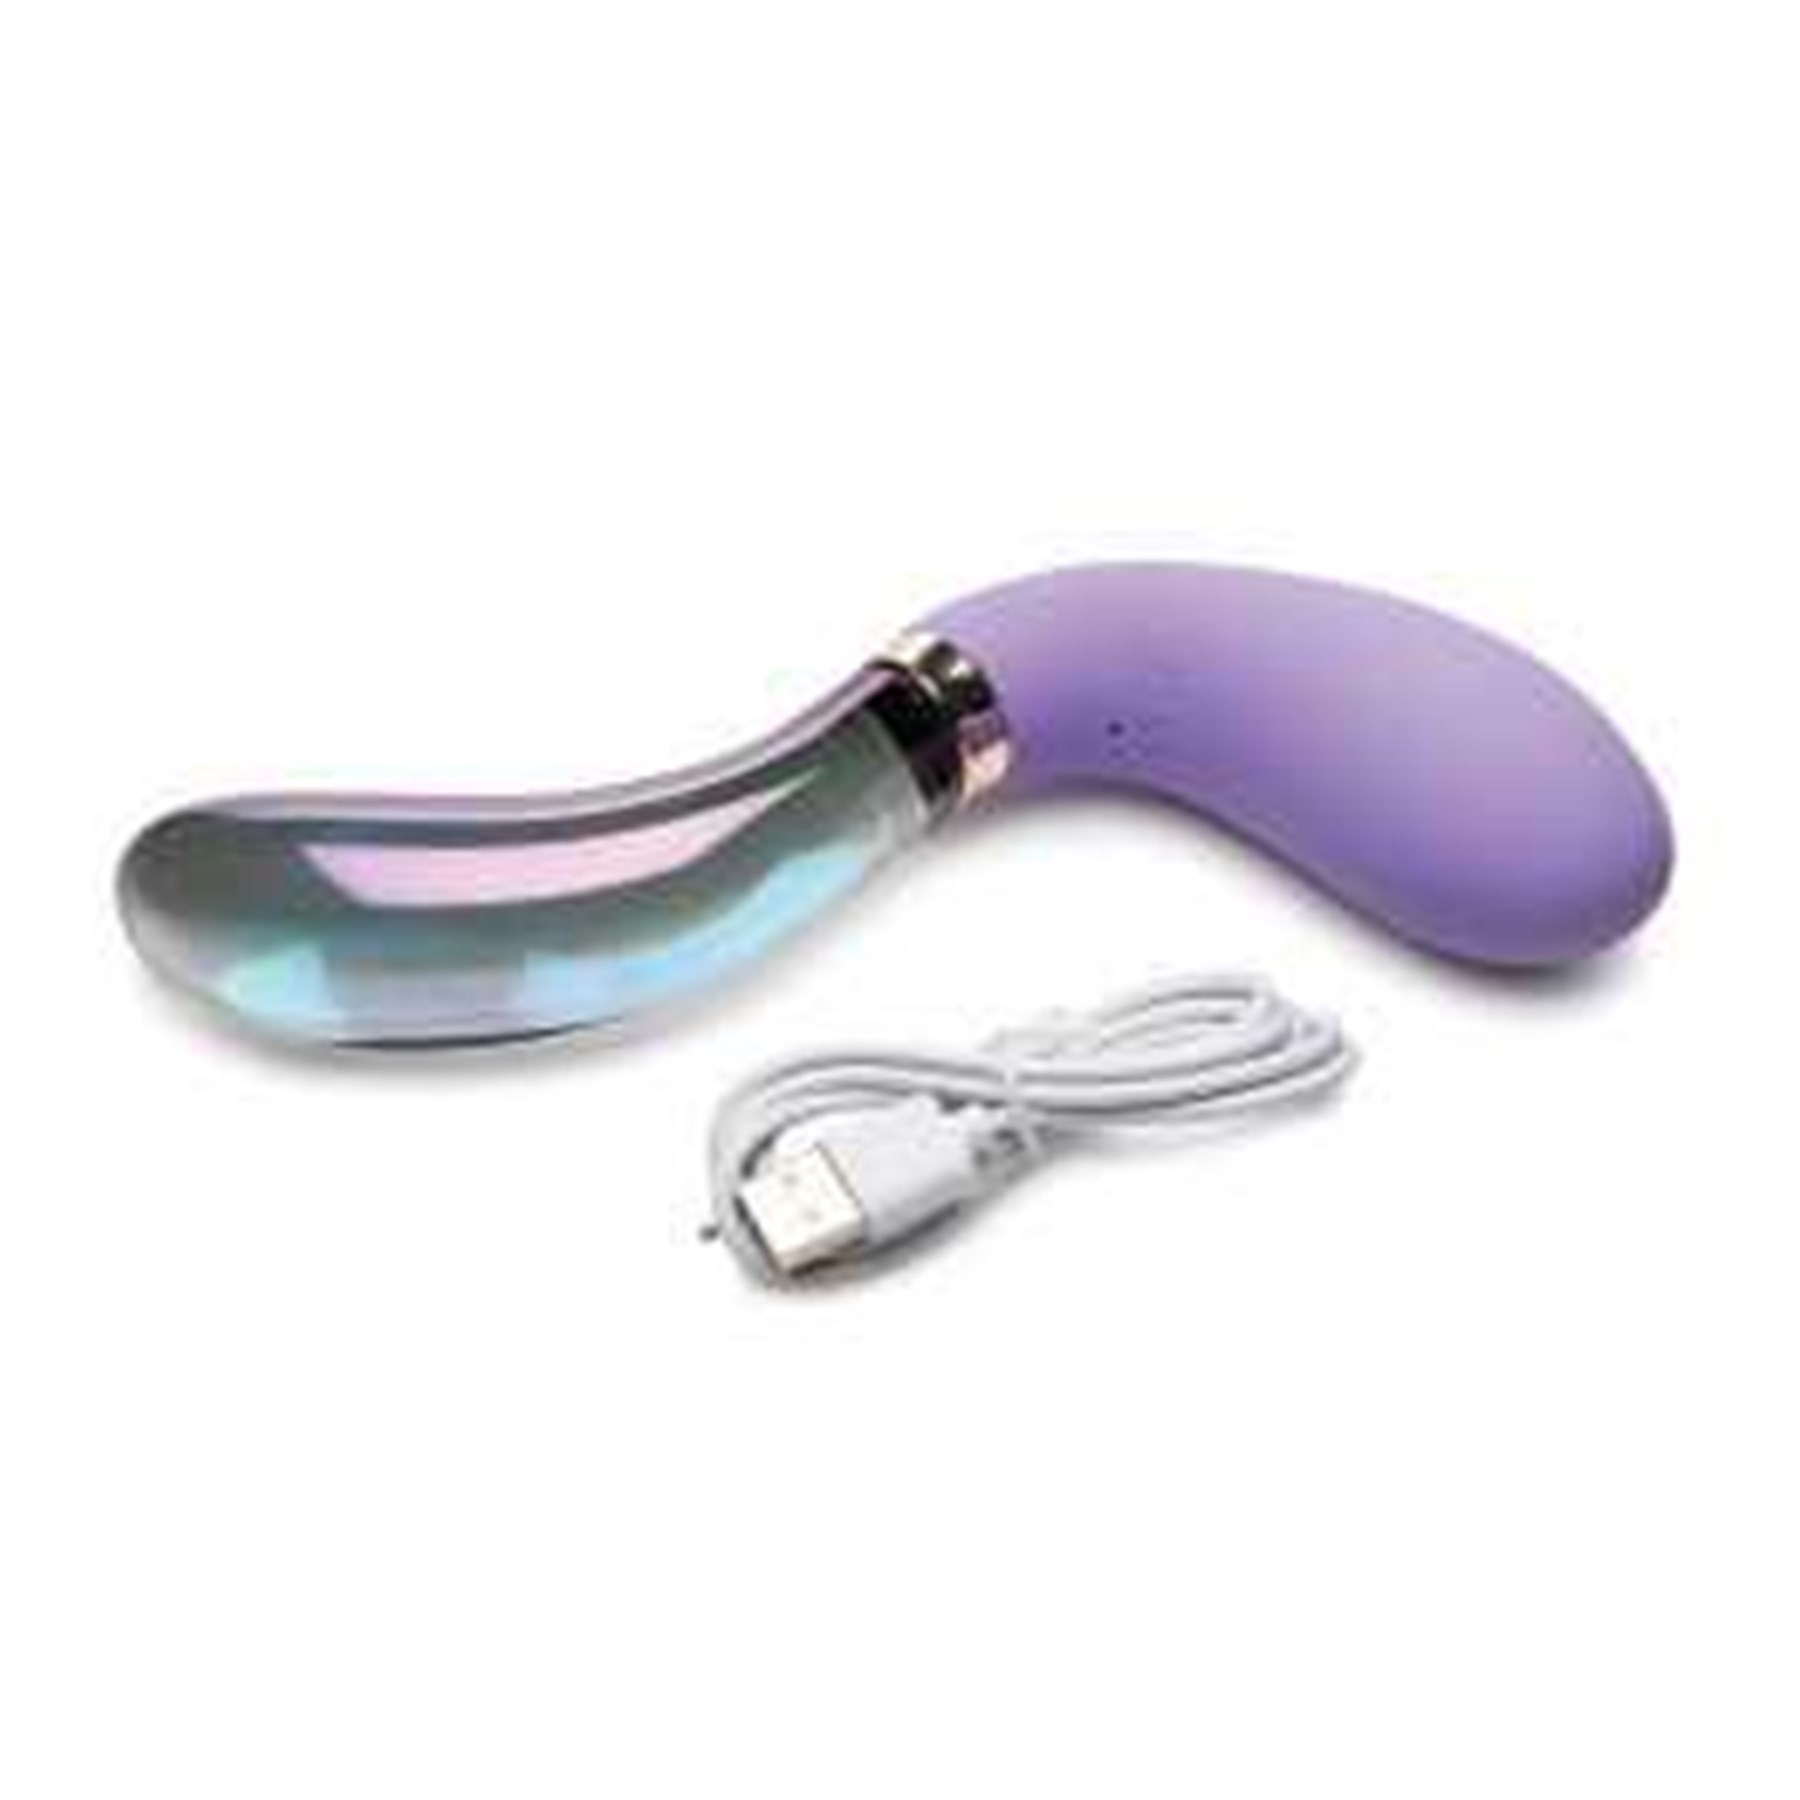 Prisms Vibra-Glass Pari Dual Ended Wavy Vibrator - Product Shot With Charging Cable